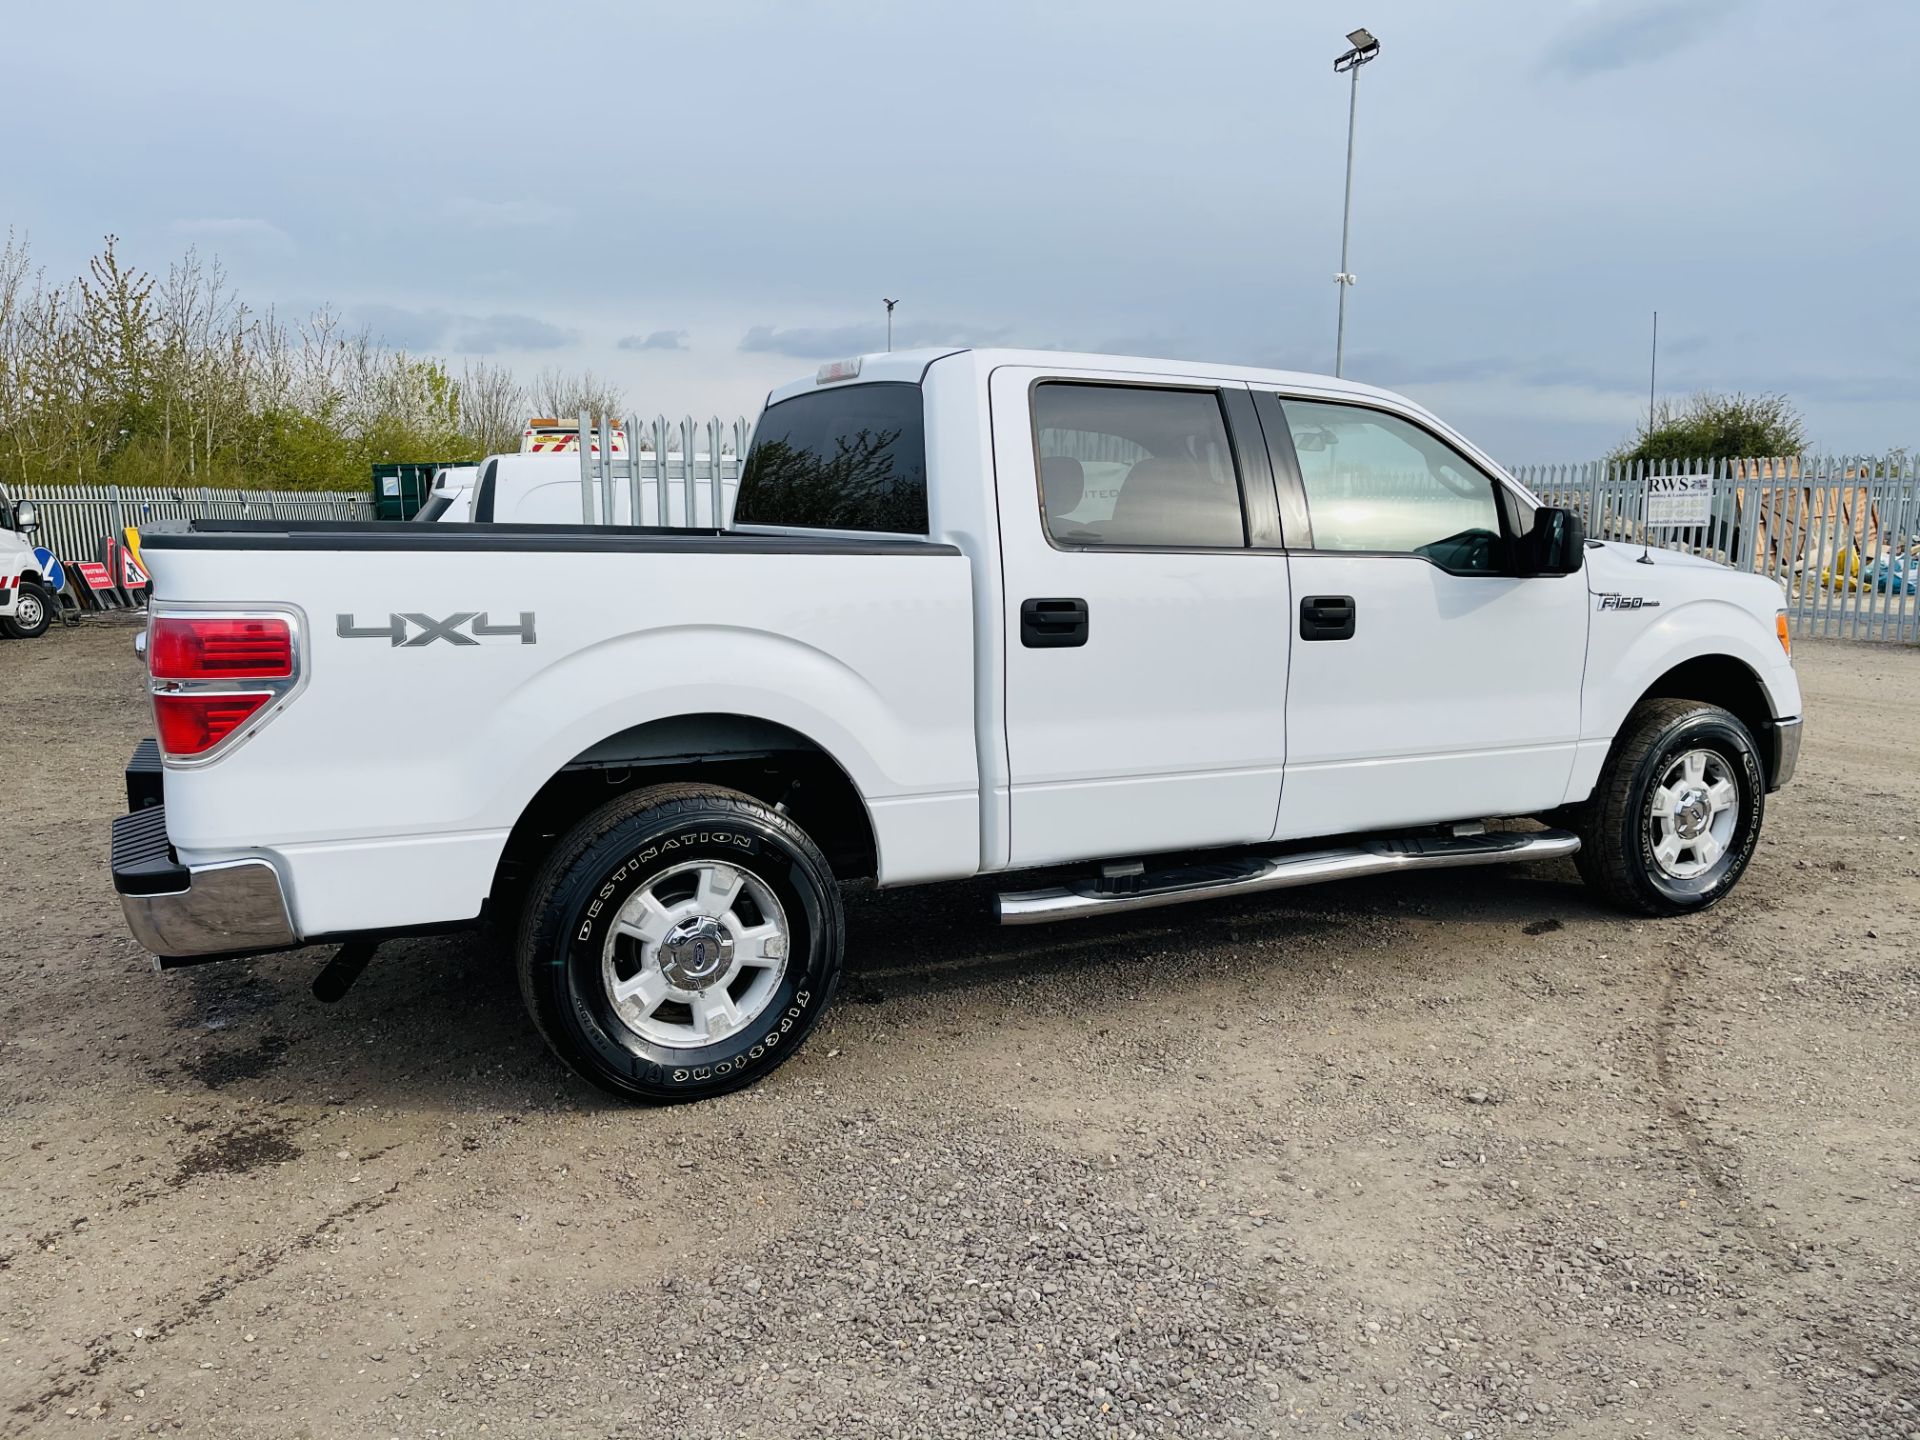 Ford F-150 XLT 4.6L V8 Super-crew 4WD 2010 ' 2010 Year' 6 Seats - Air con - NO RESERVE - Image 12 of 24